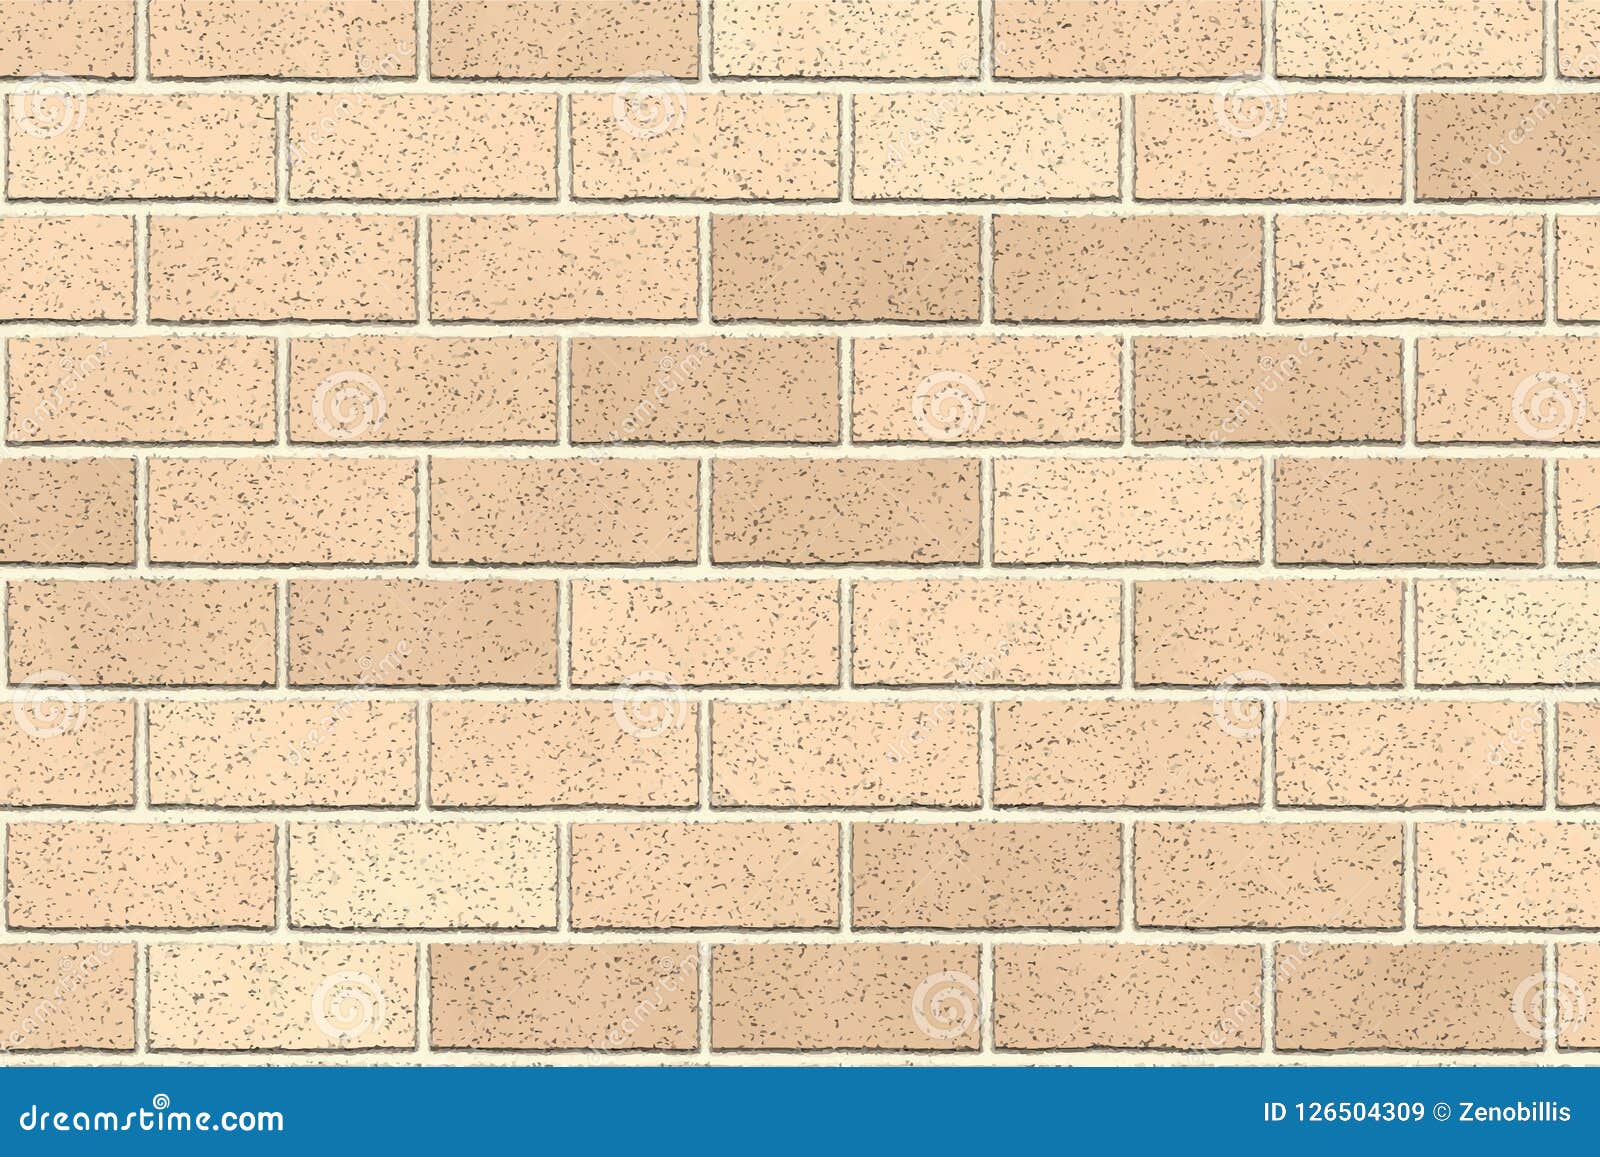 light brown brick wall abstract background. texture of bricks.  . template  for web banners